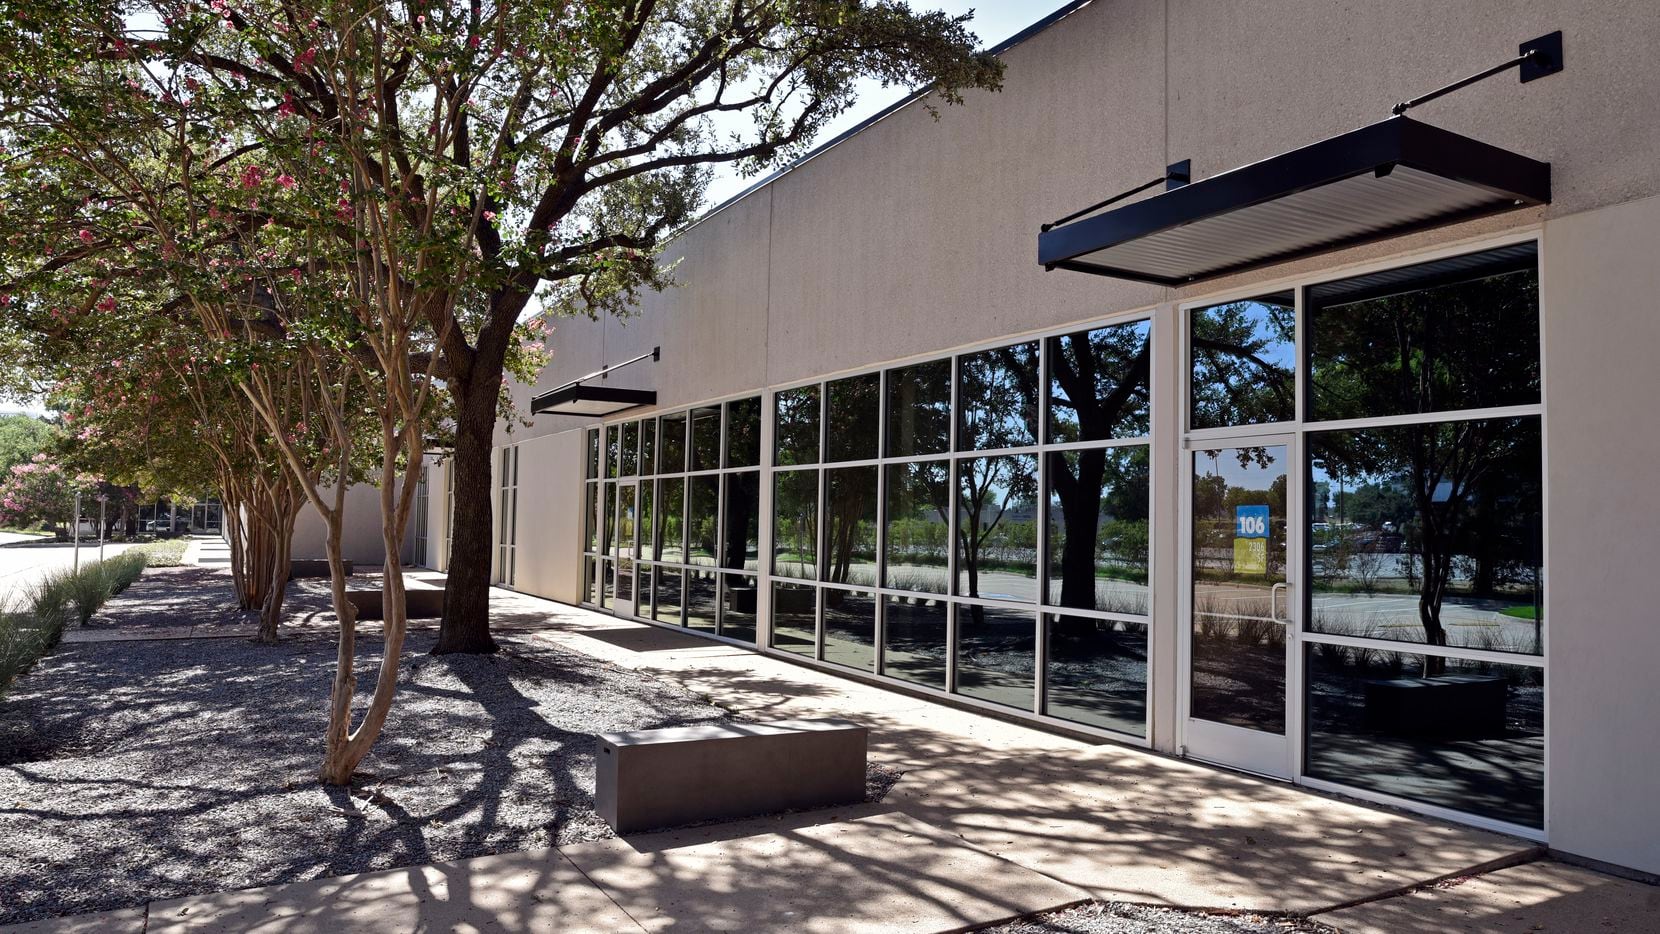 The 40-year-old office center near Mockingbird Lane has been redeveloped into loft-style...